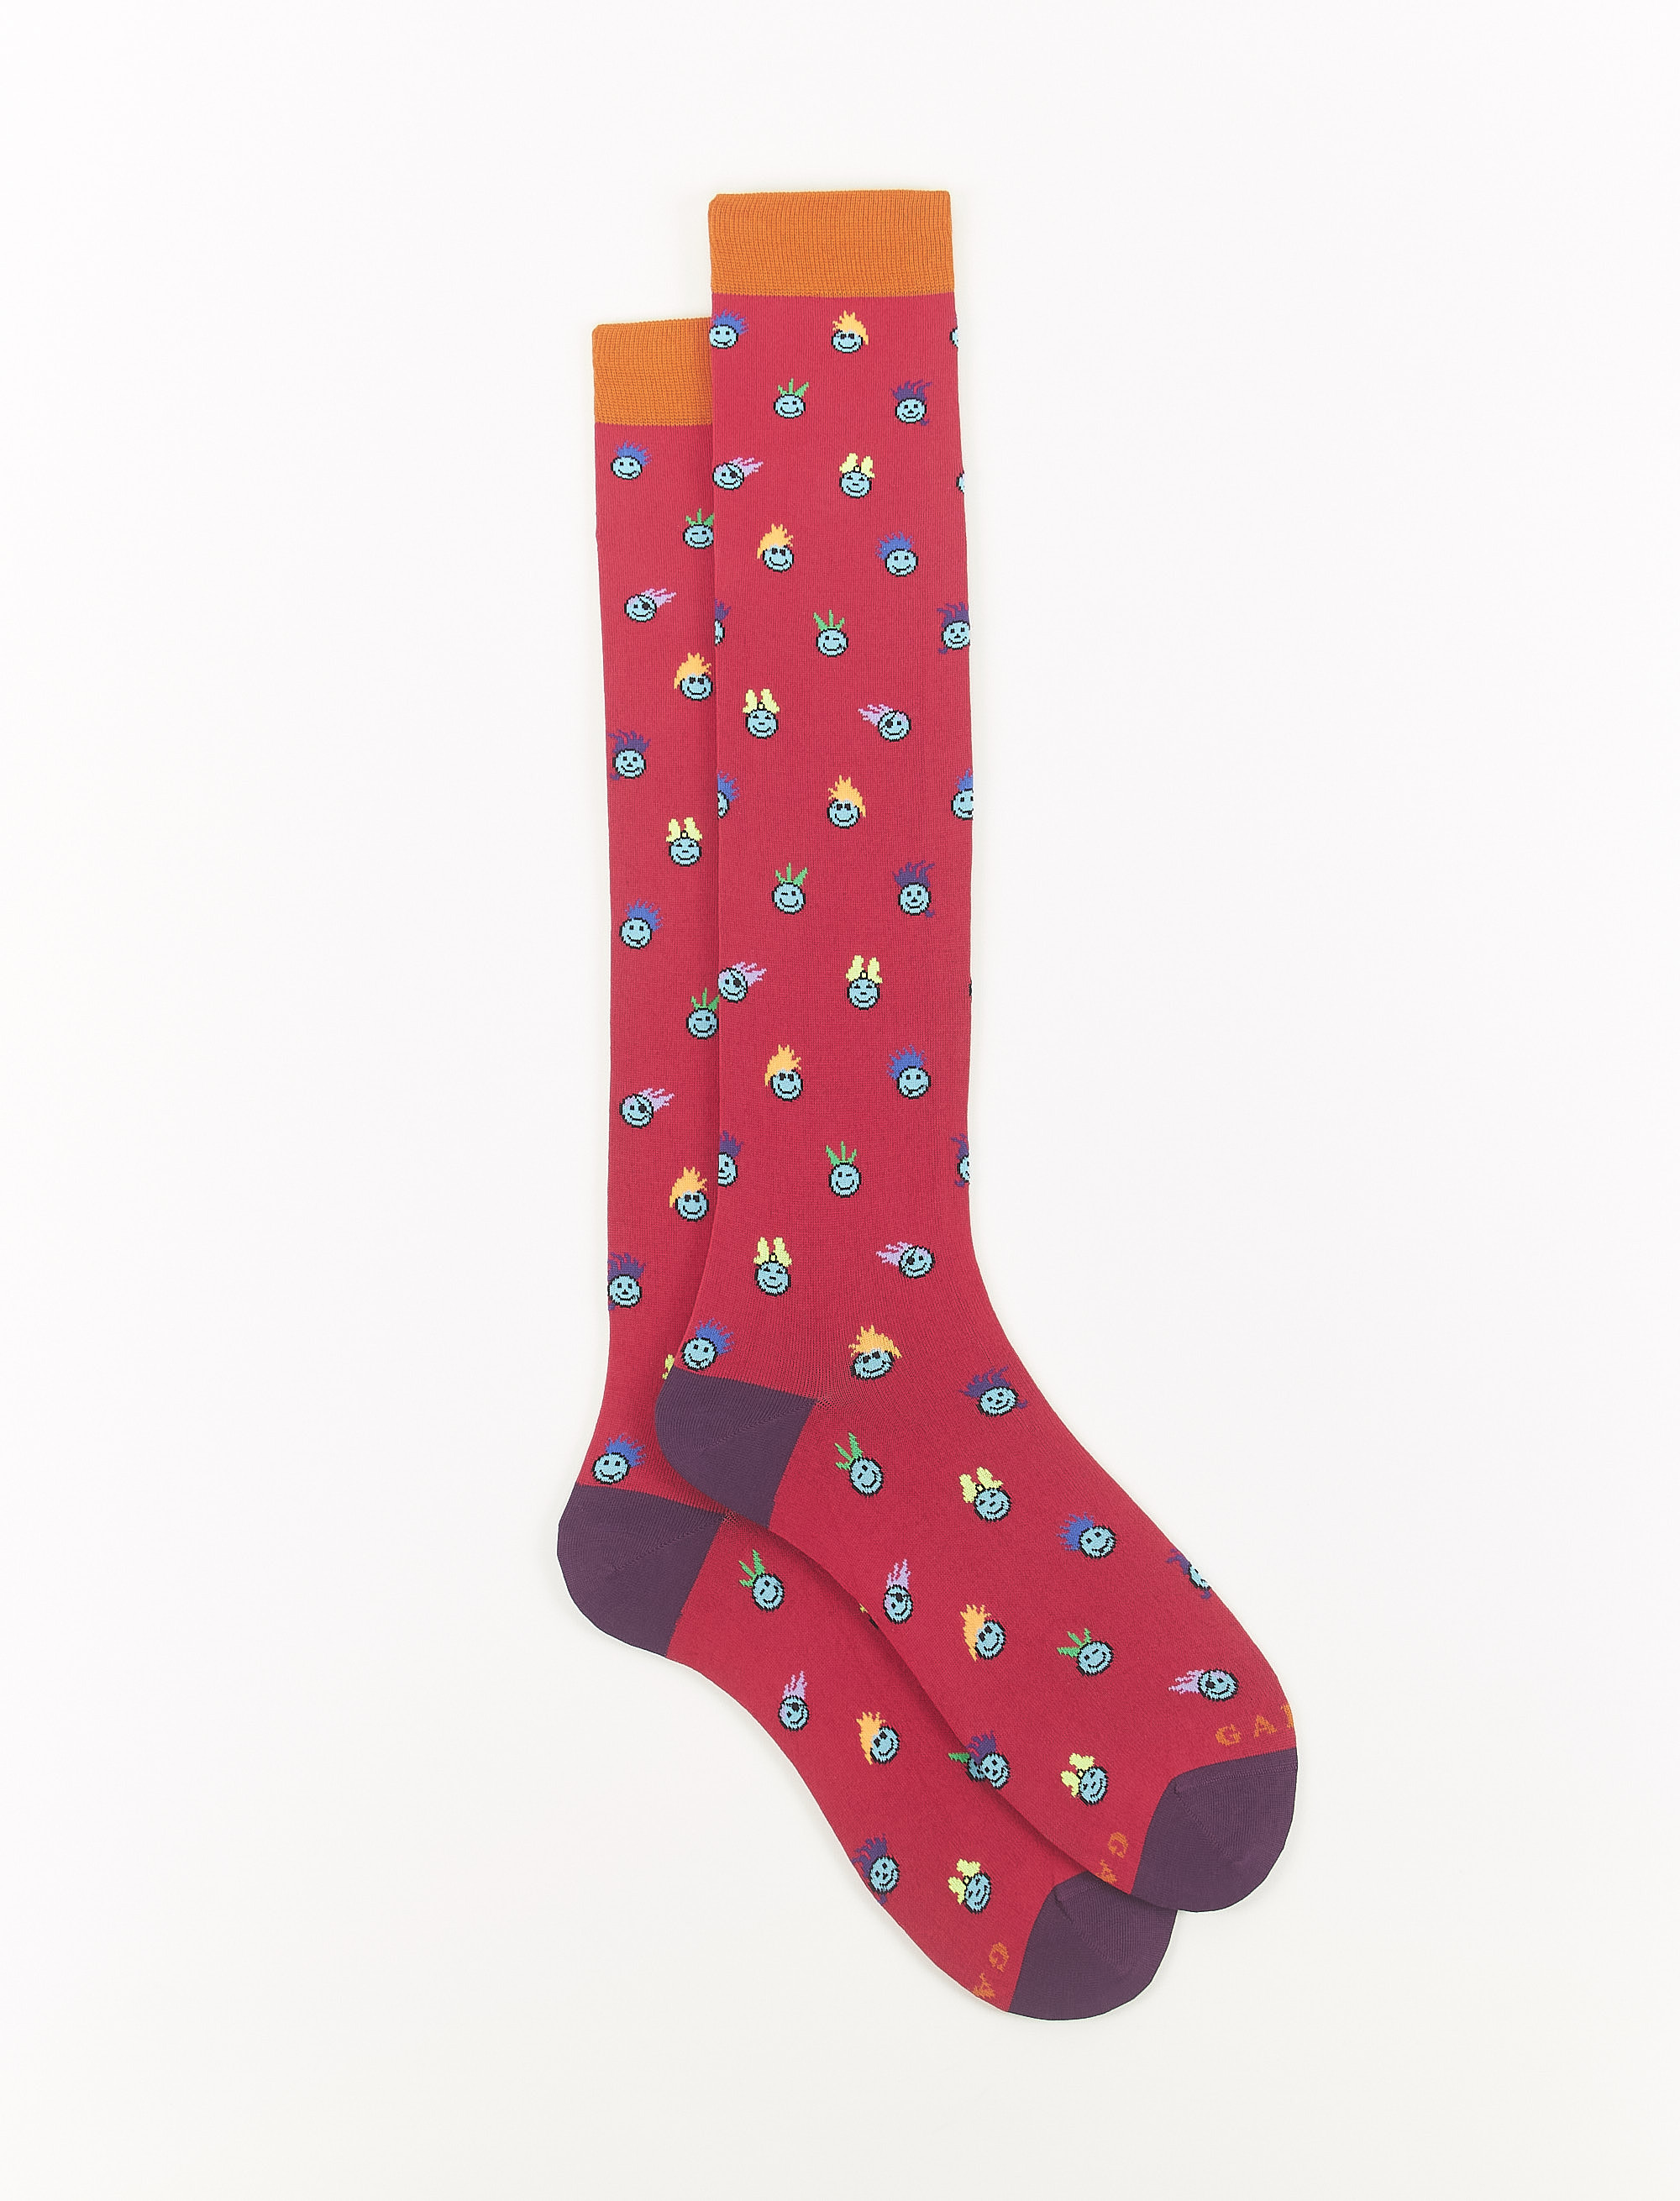 Women's long cherry light cotton socks with emoji motif - The FW Edition | Gallo 1927 - Official Online Shop